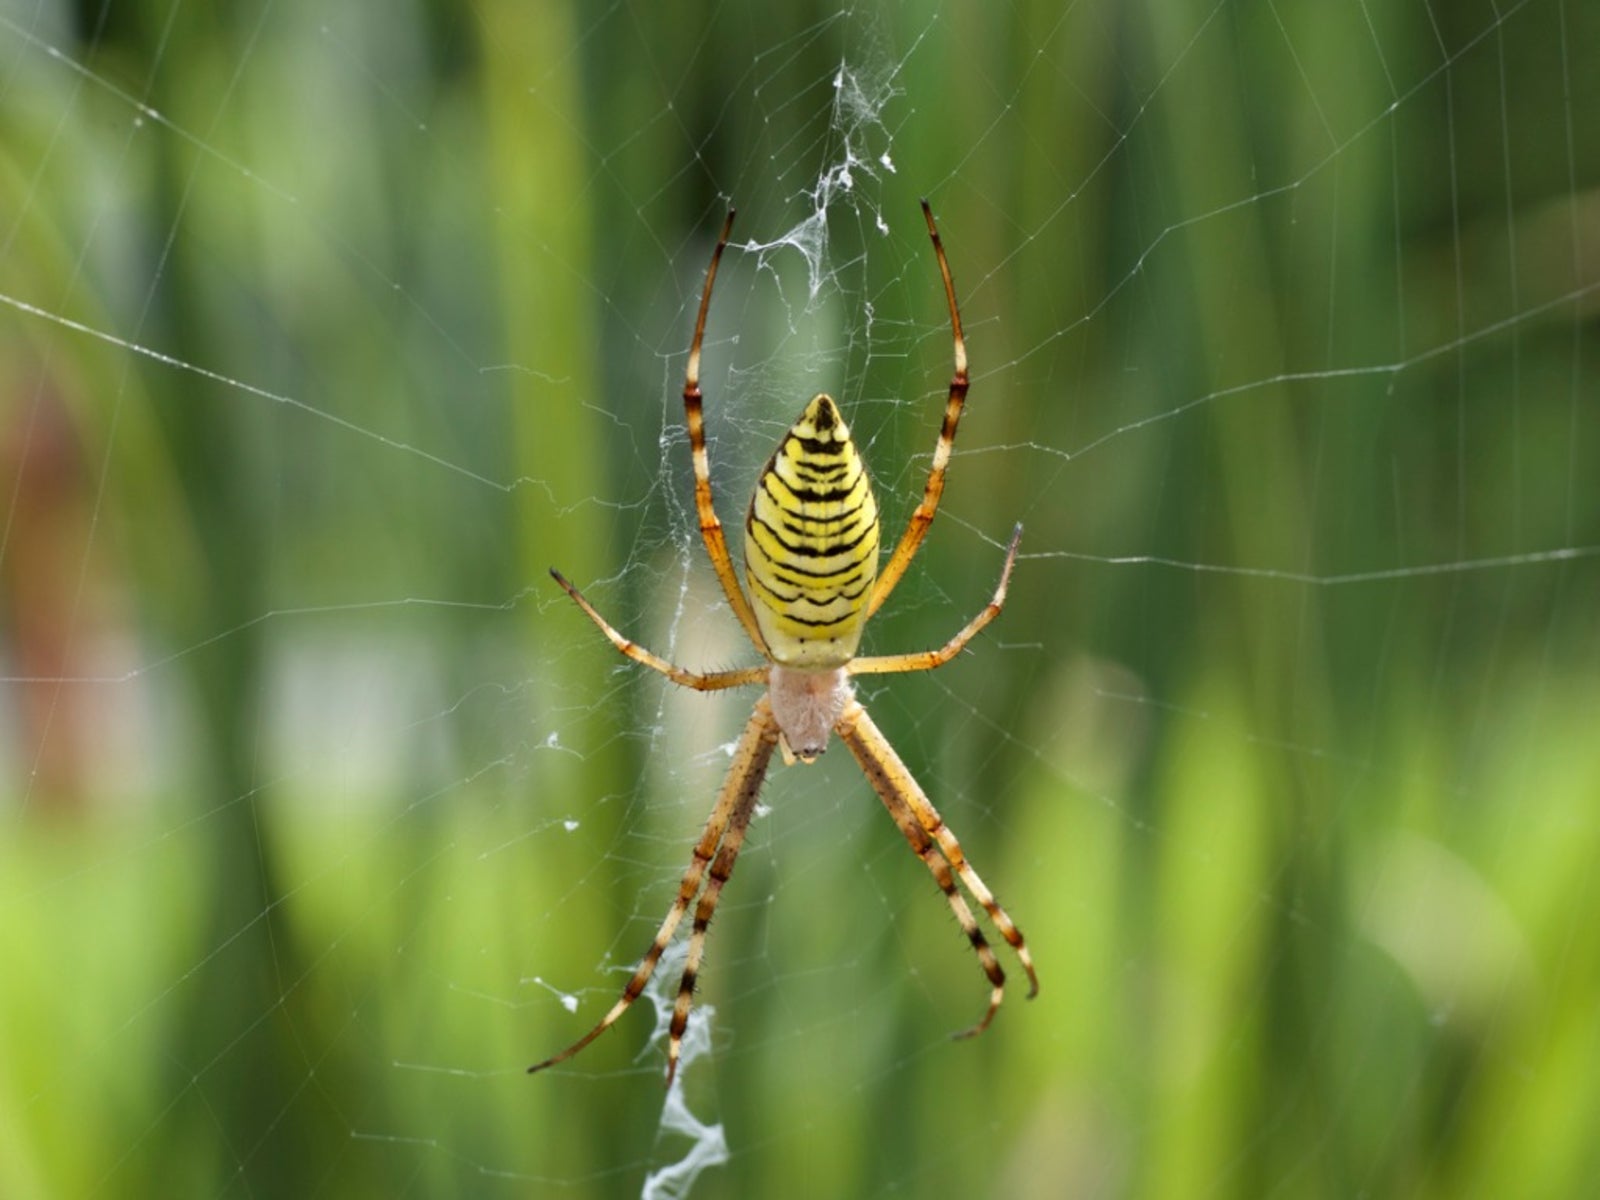 Using These Spiders For Pest Control Can Reduce Insecticide Use: U.K. Study